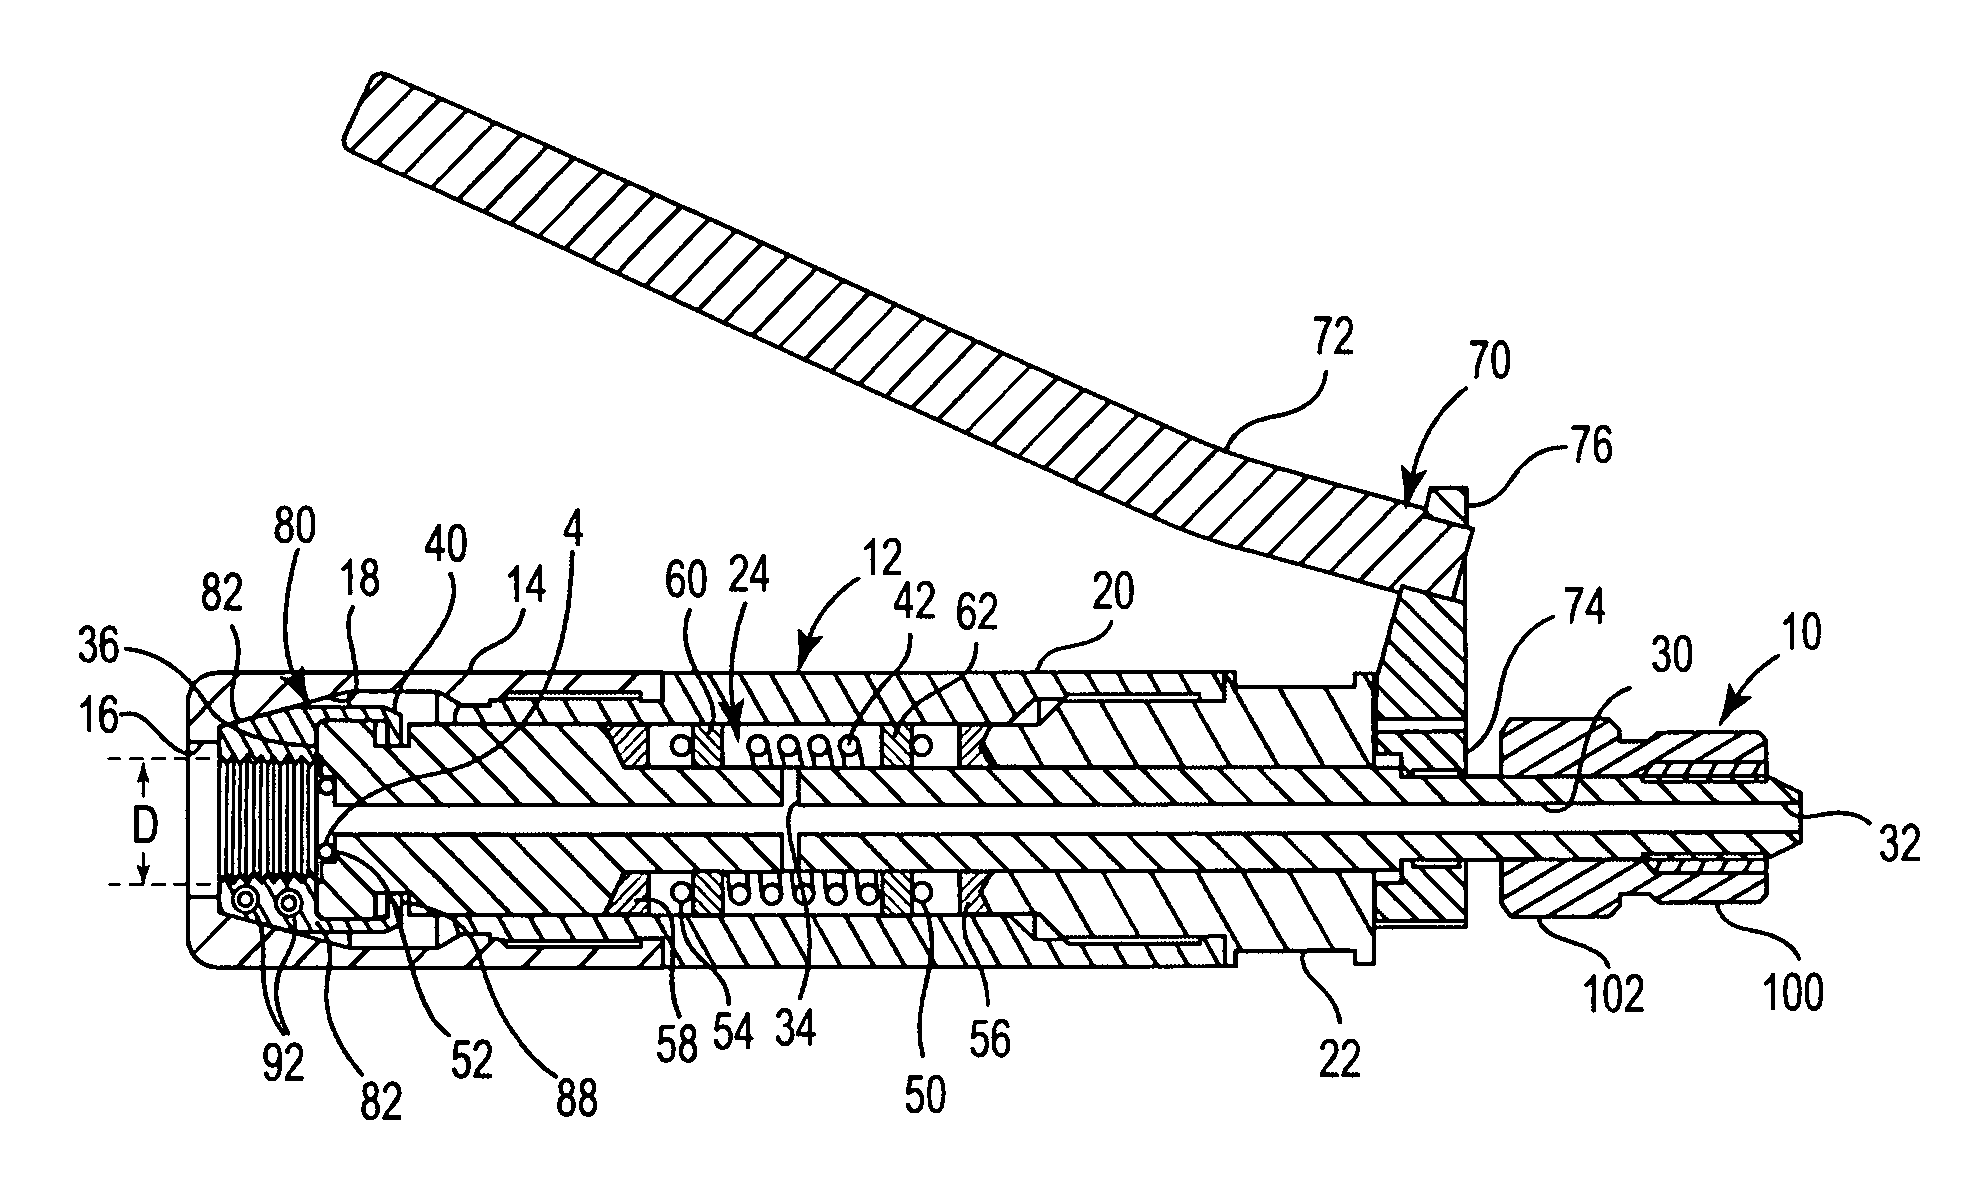 Hydrostatic test tool and method of use